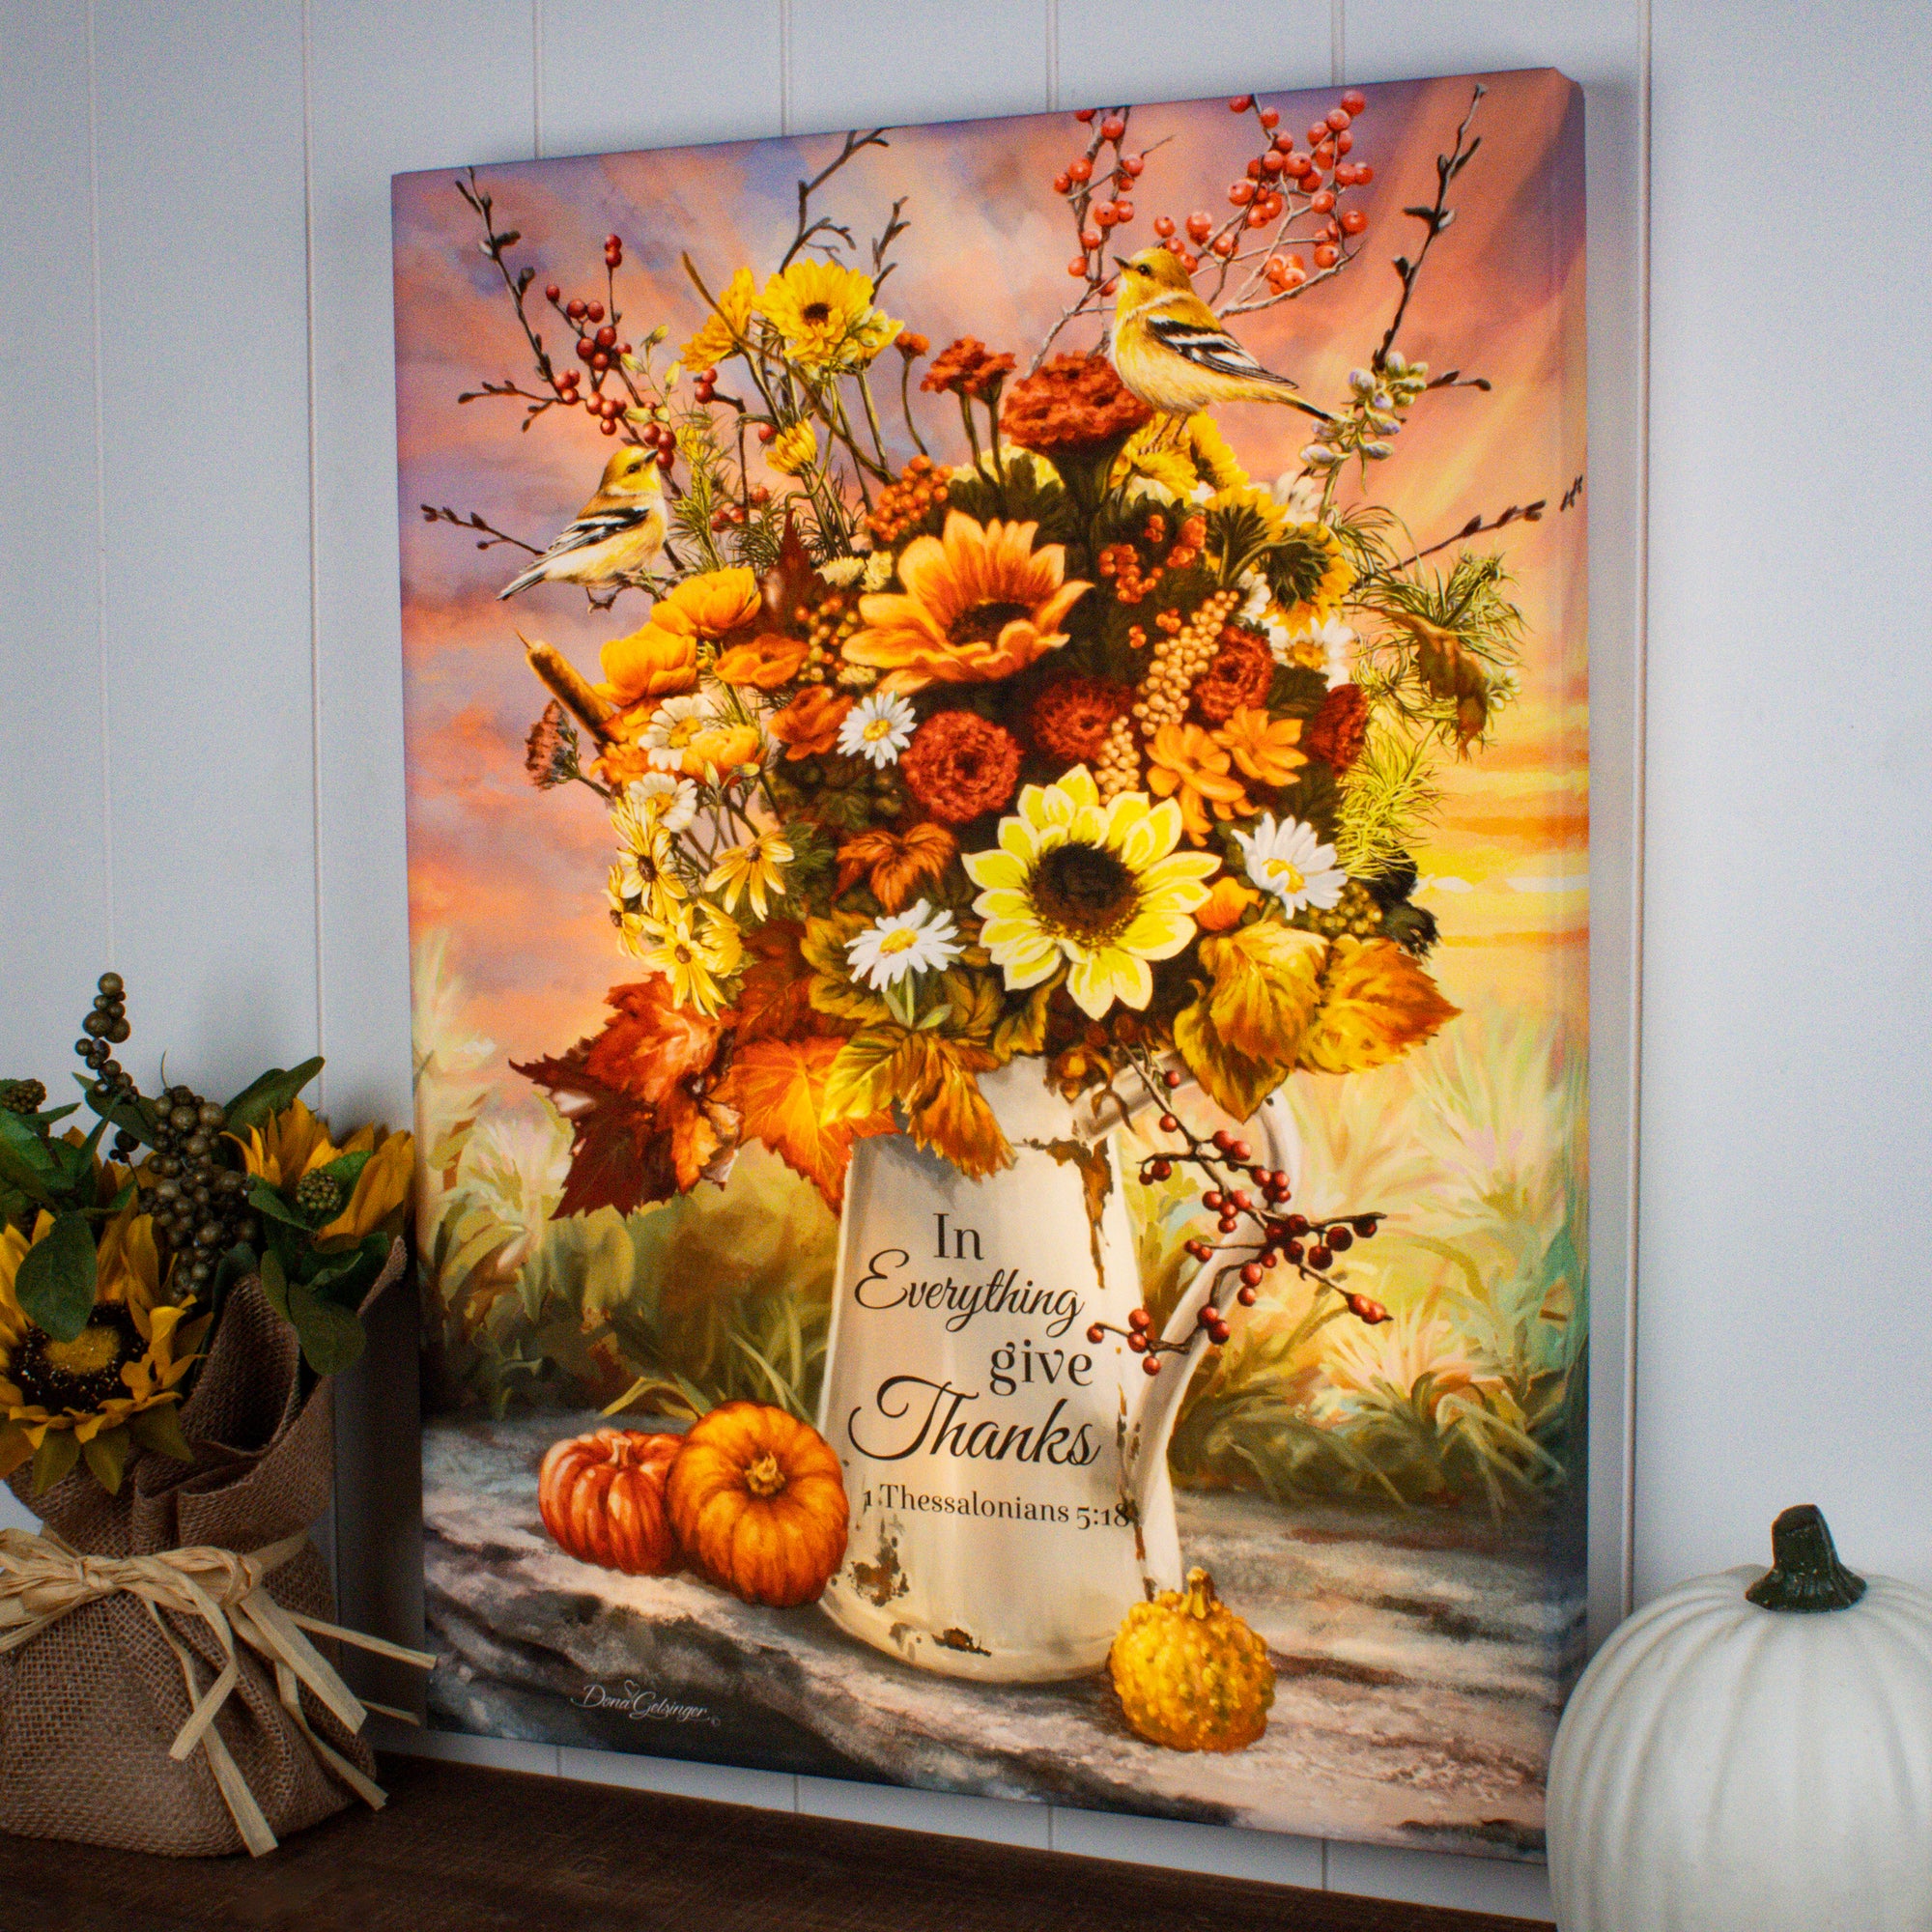 In Everything Give Thanks 24x18 Fully Illuminated LED Wall Art